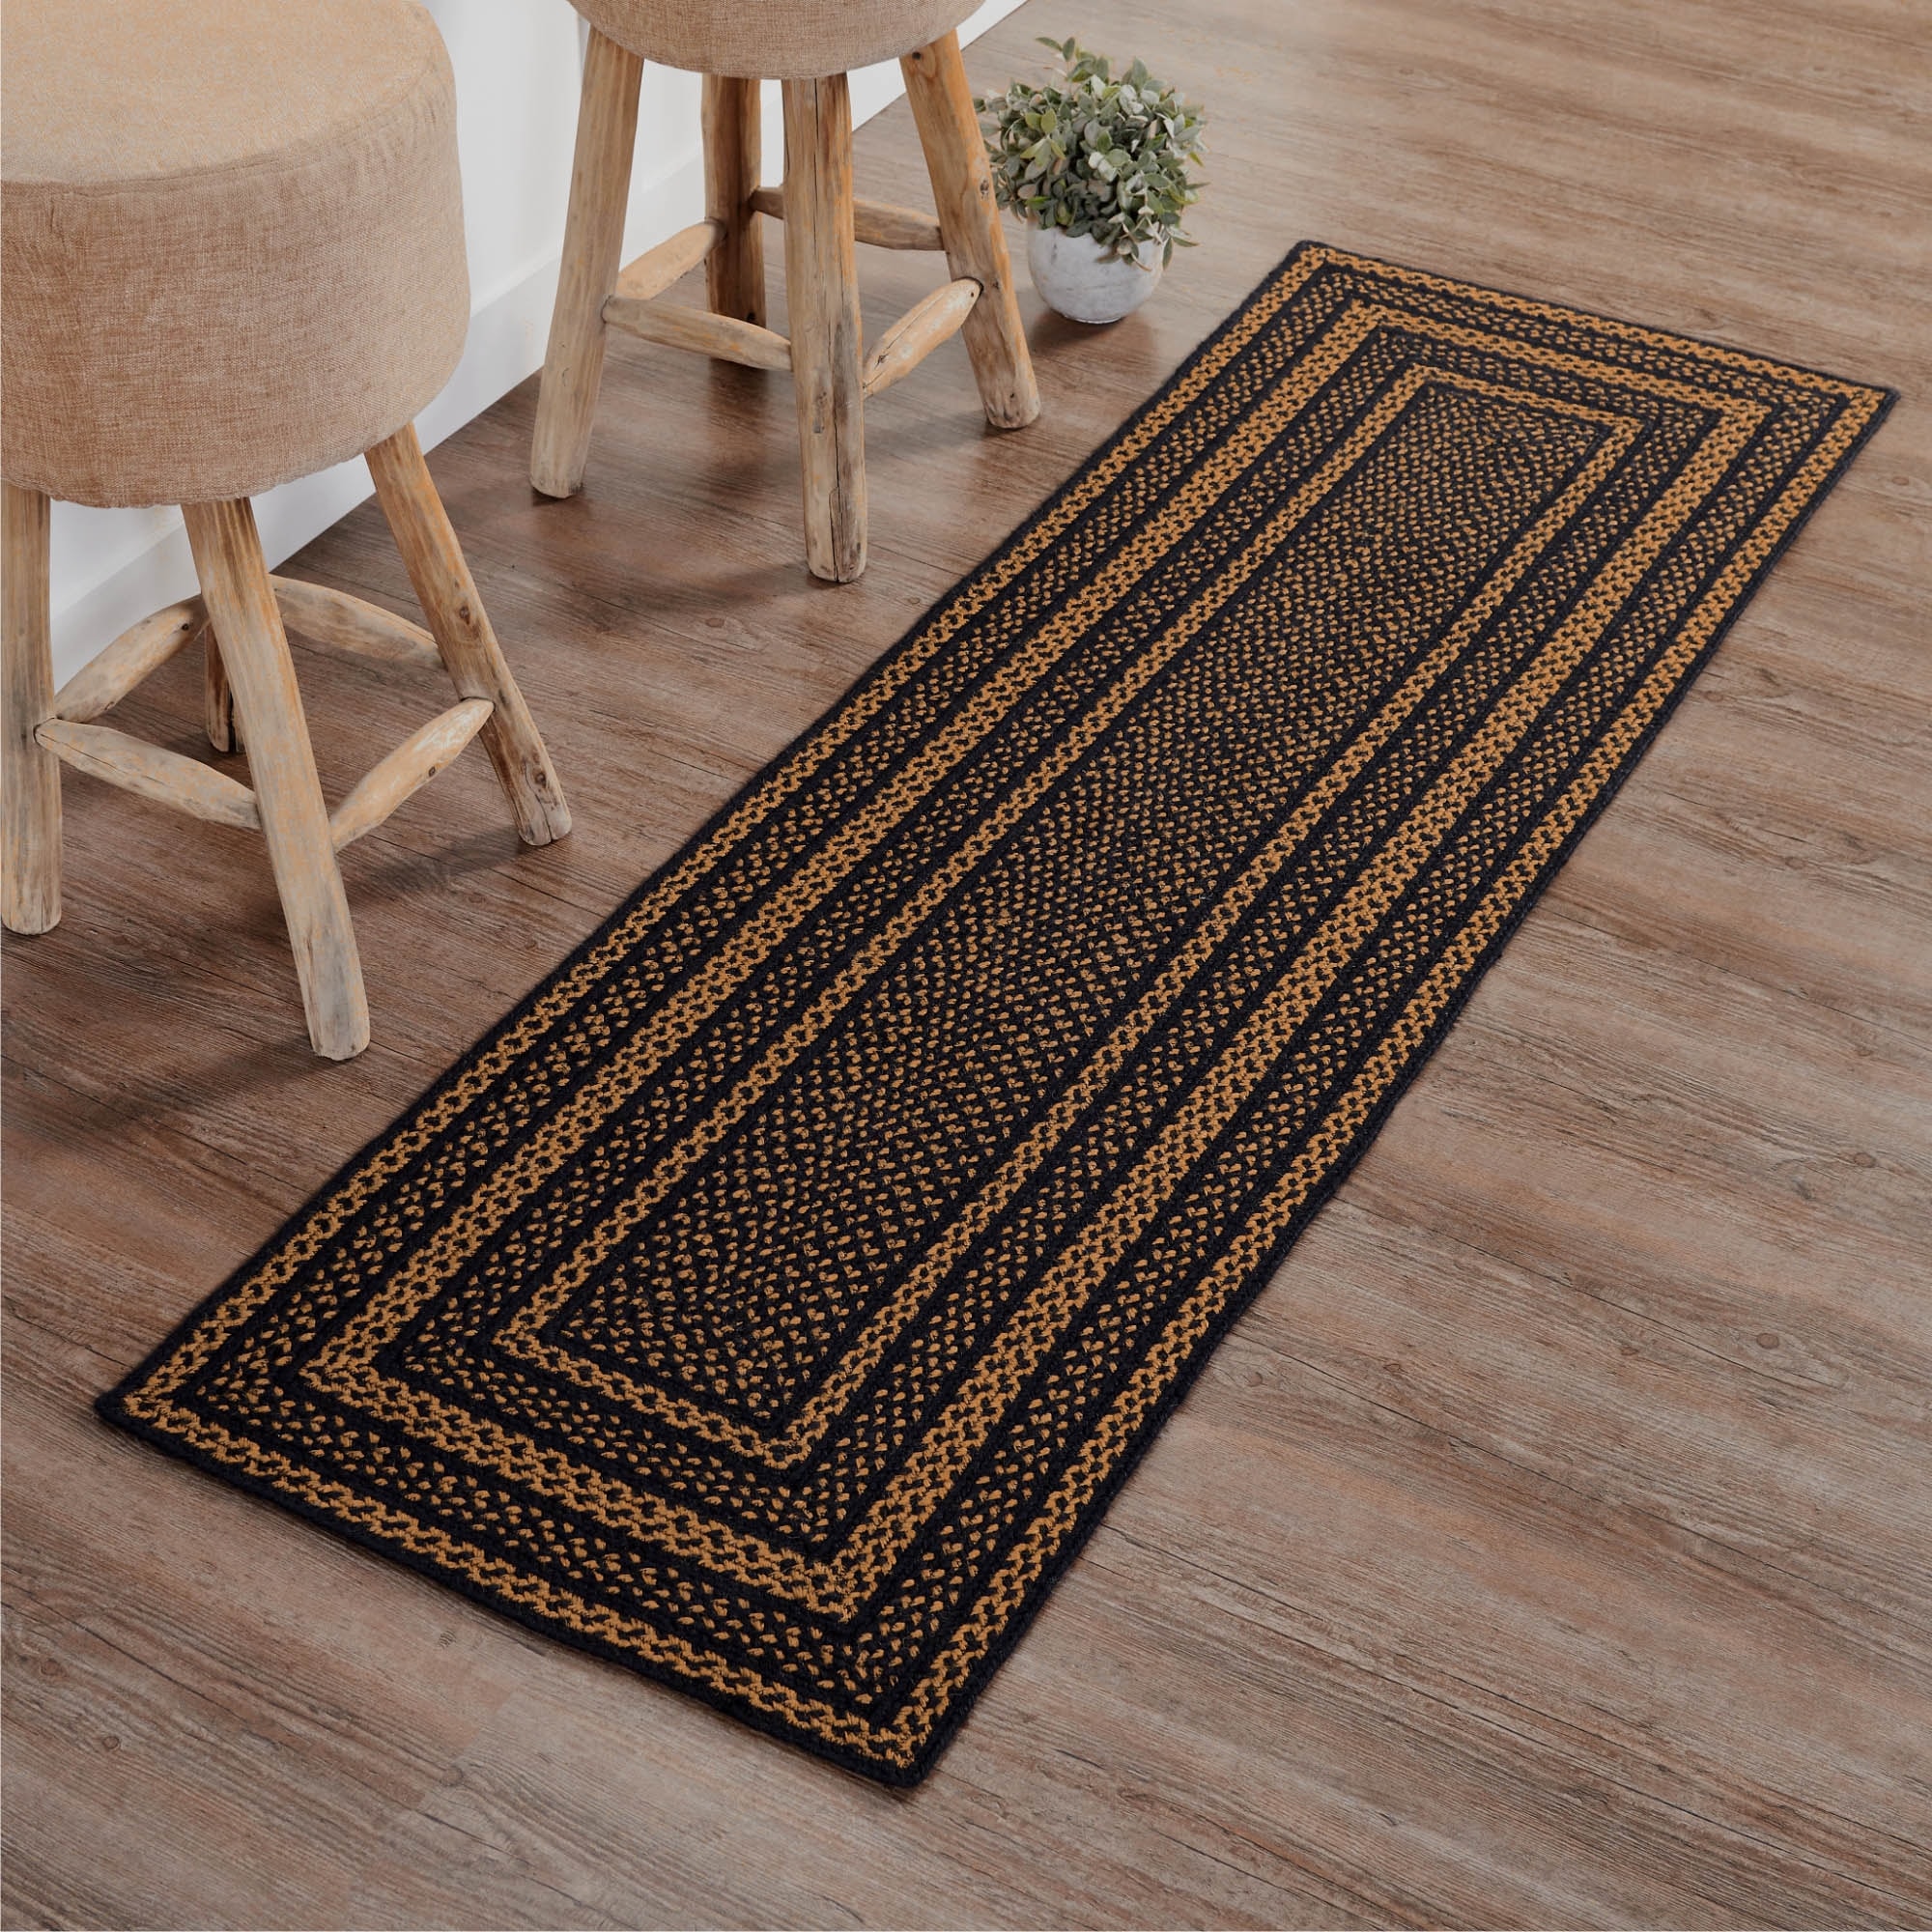 VHC Brands Braided Rug - Floral Vine Jute Rug Oval Welcome with Pad 27x48